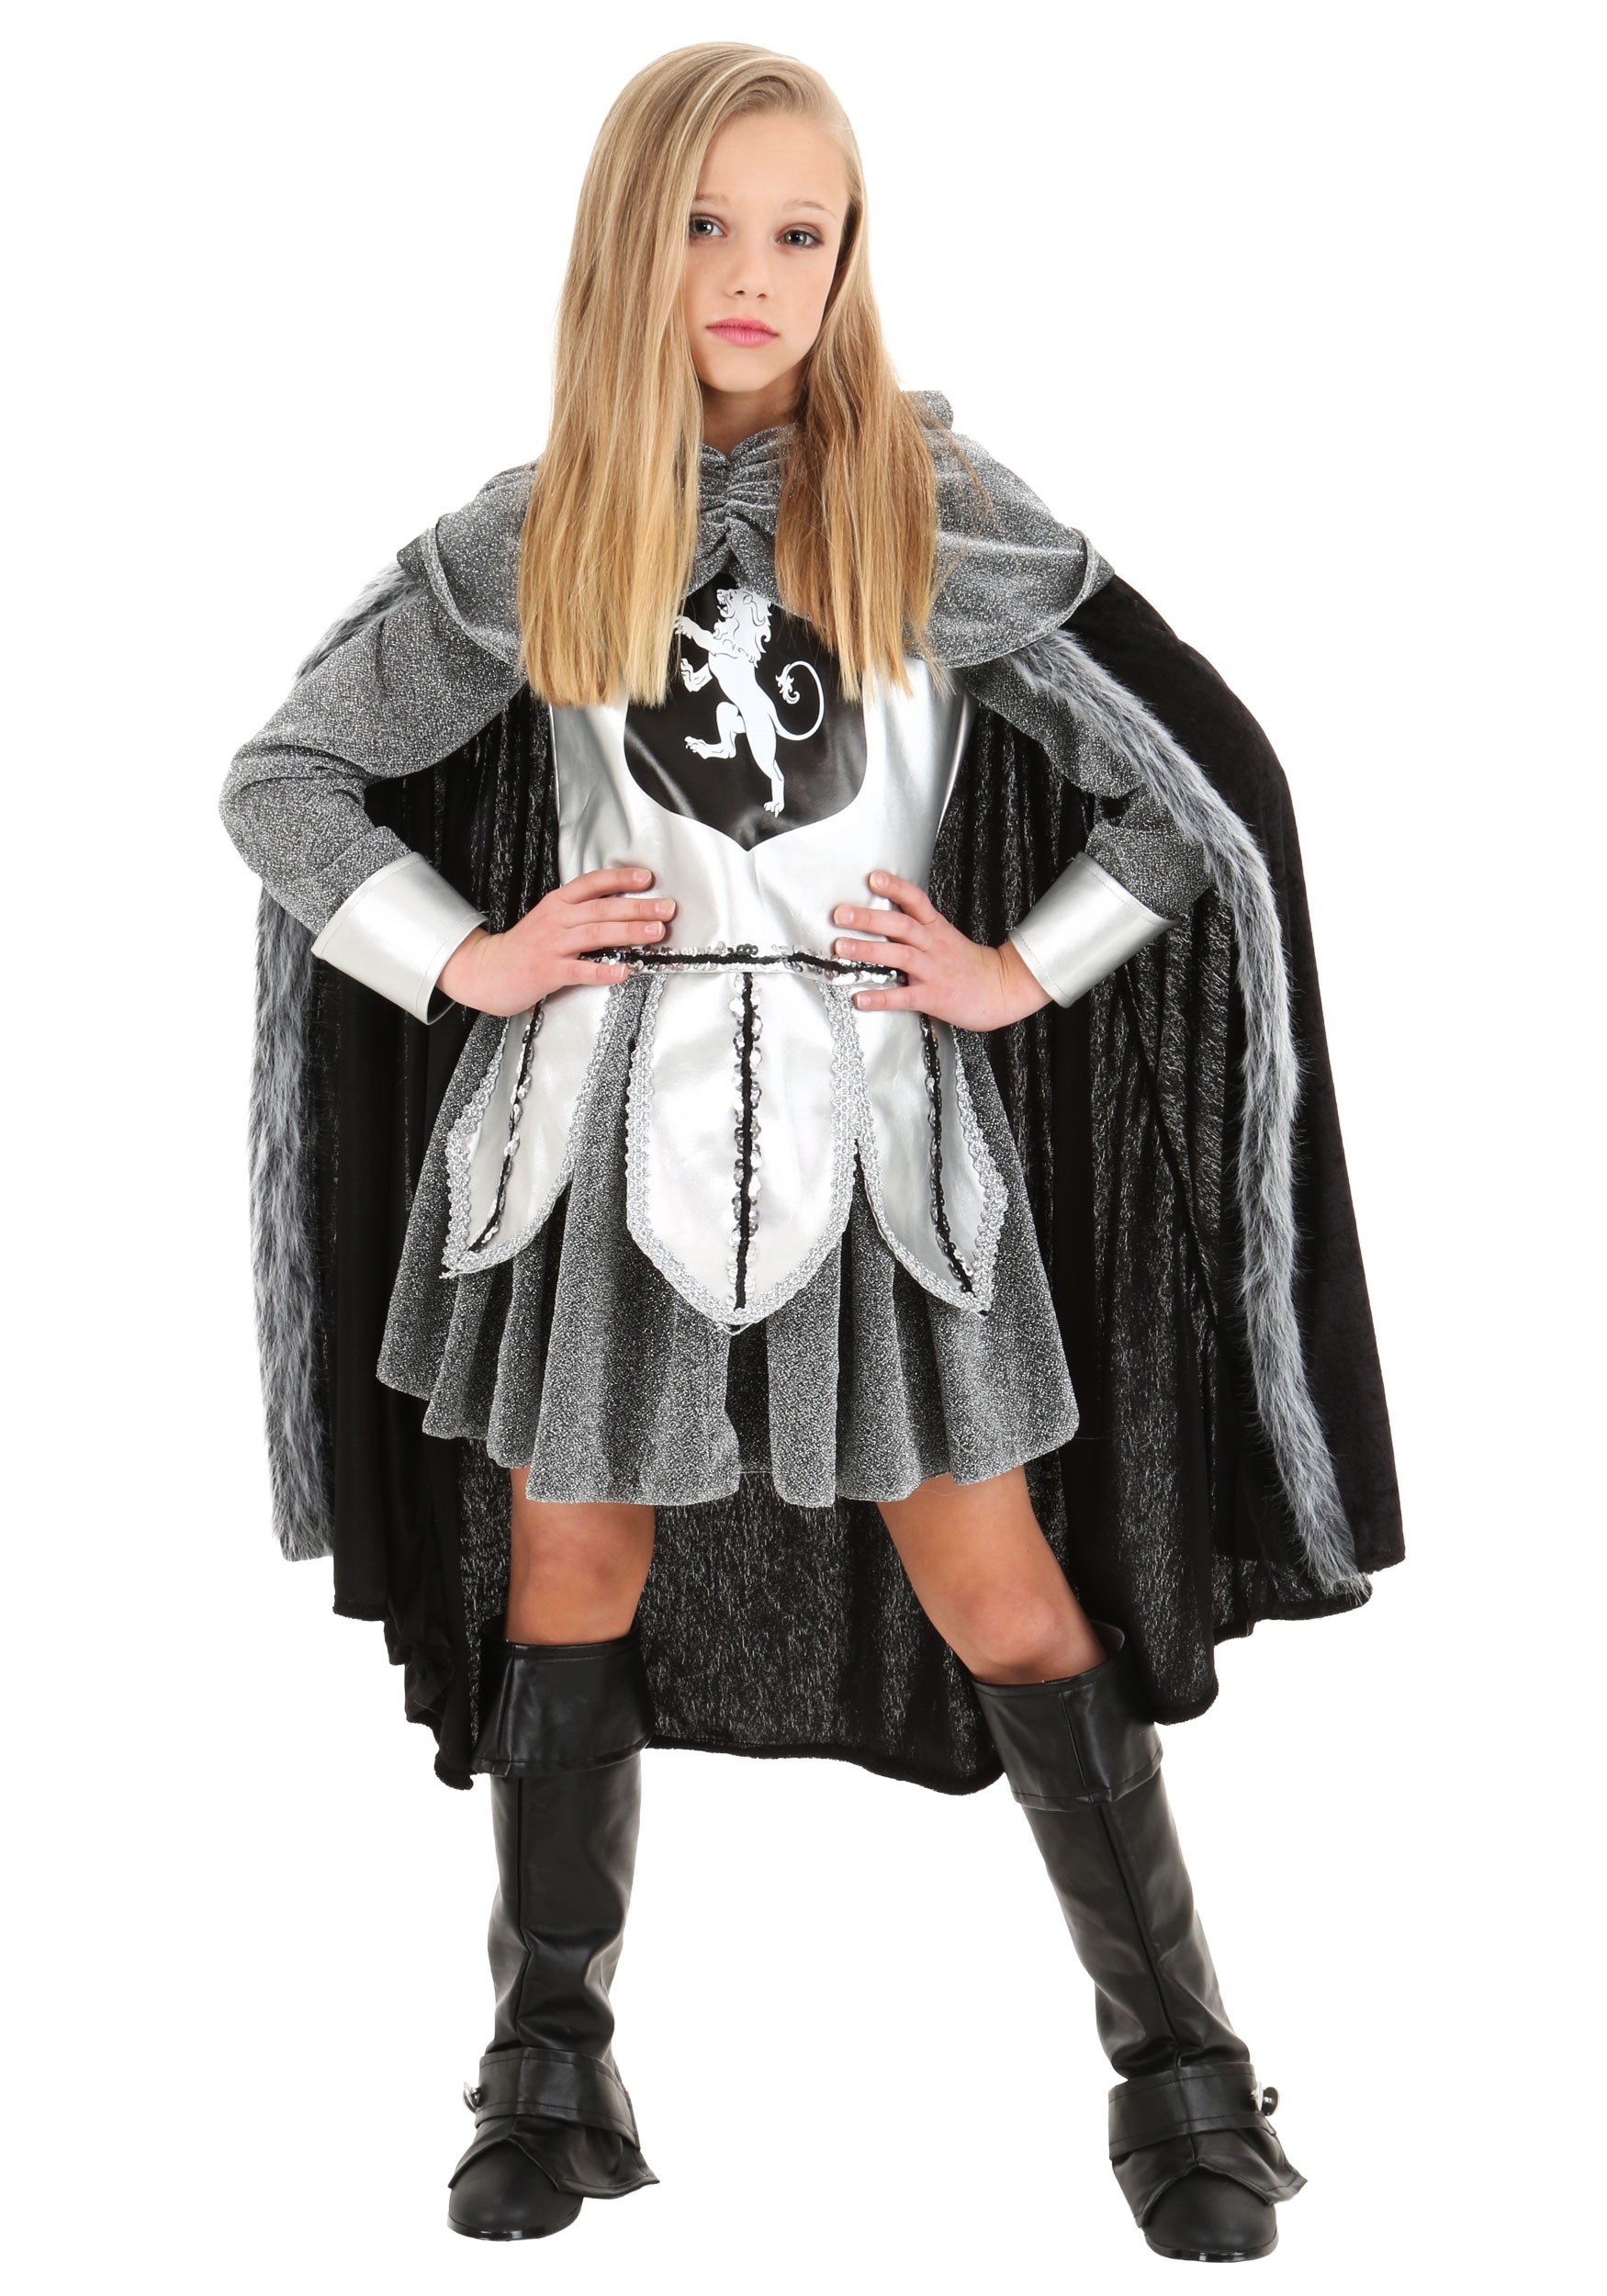 Photos - Fancy Dress Warrior FUN Costumes  Knight Costume for Girls | Exclusive | Made By Us Bla 